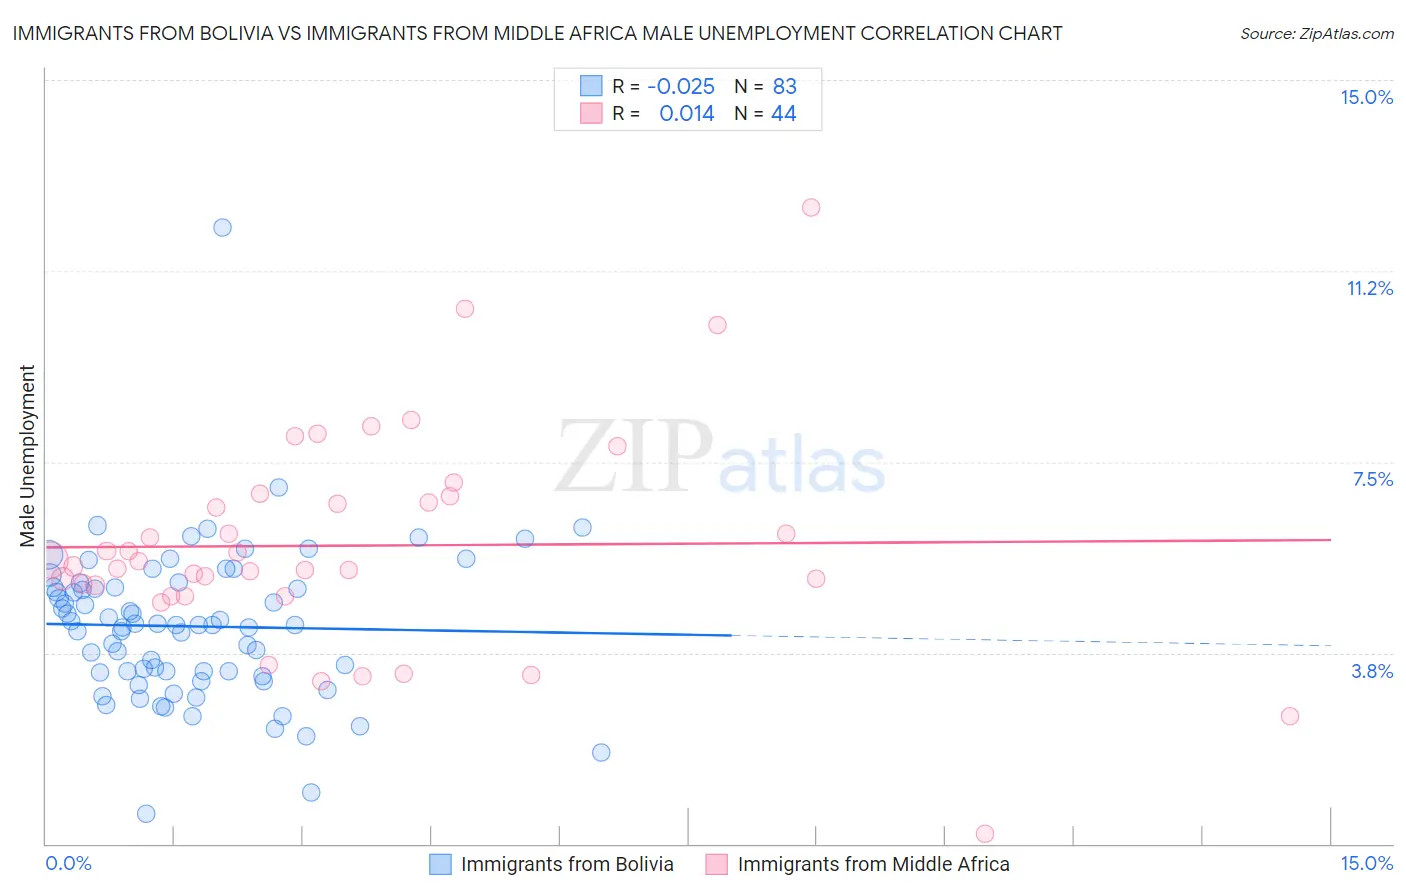 Immigrants from Bolivia vs Immigrants from Middle Africa Male Unemployment